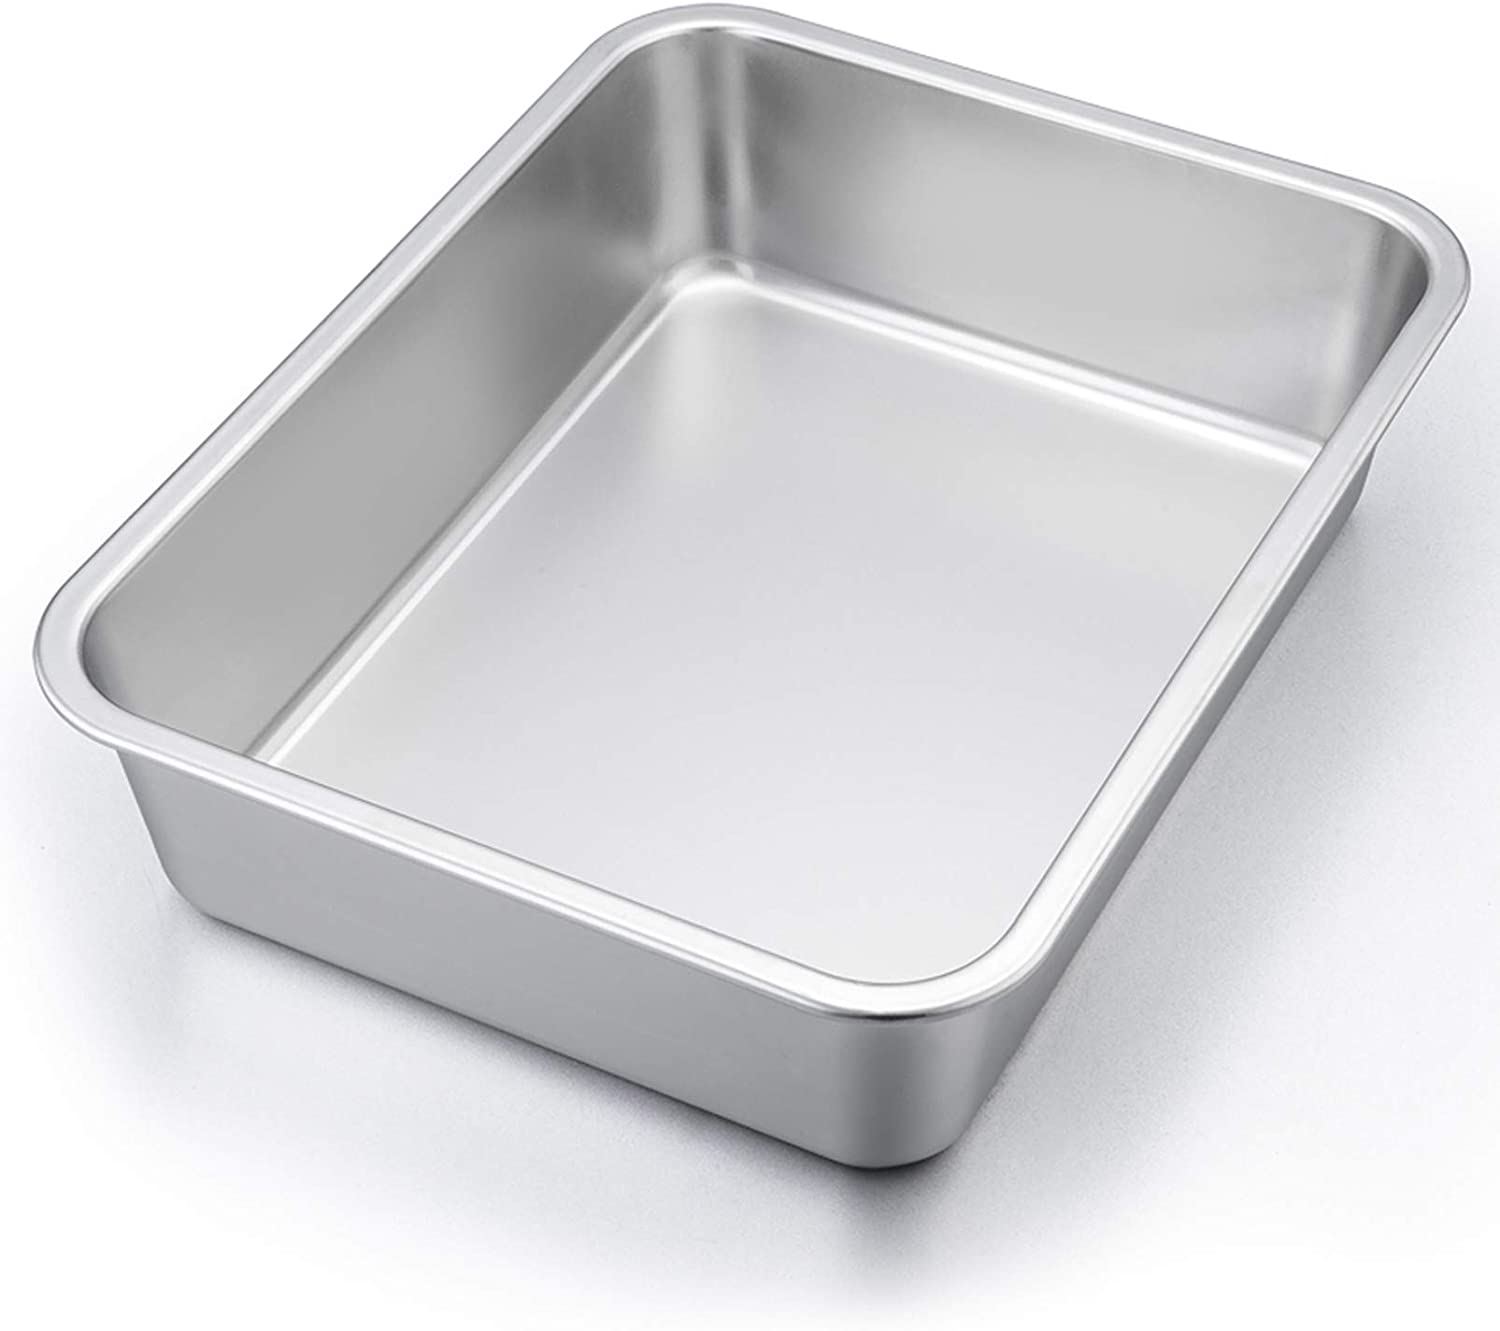 P&P CHEF Heavy Duty Stainless Steel Lasagna Pan